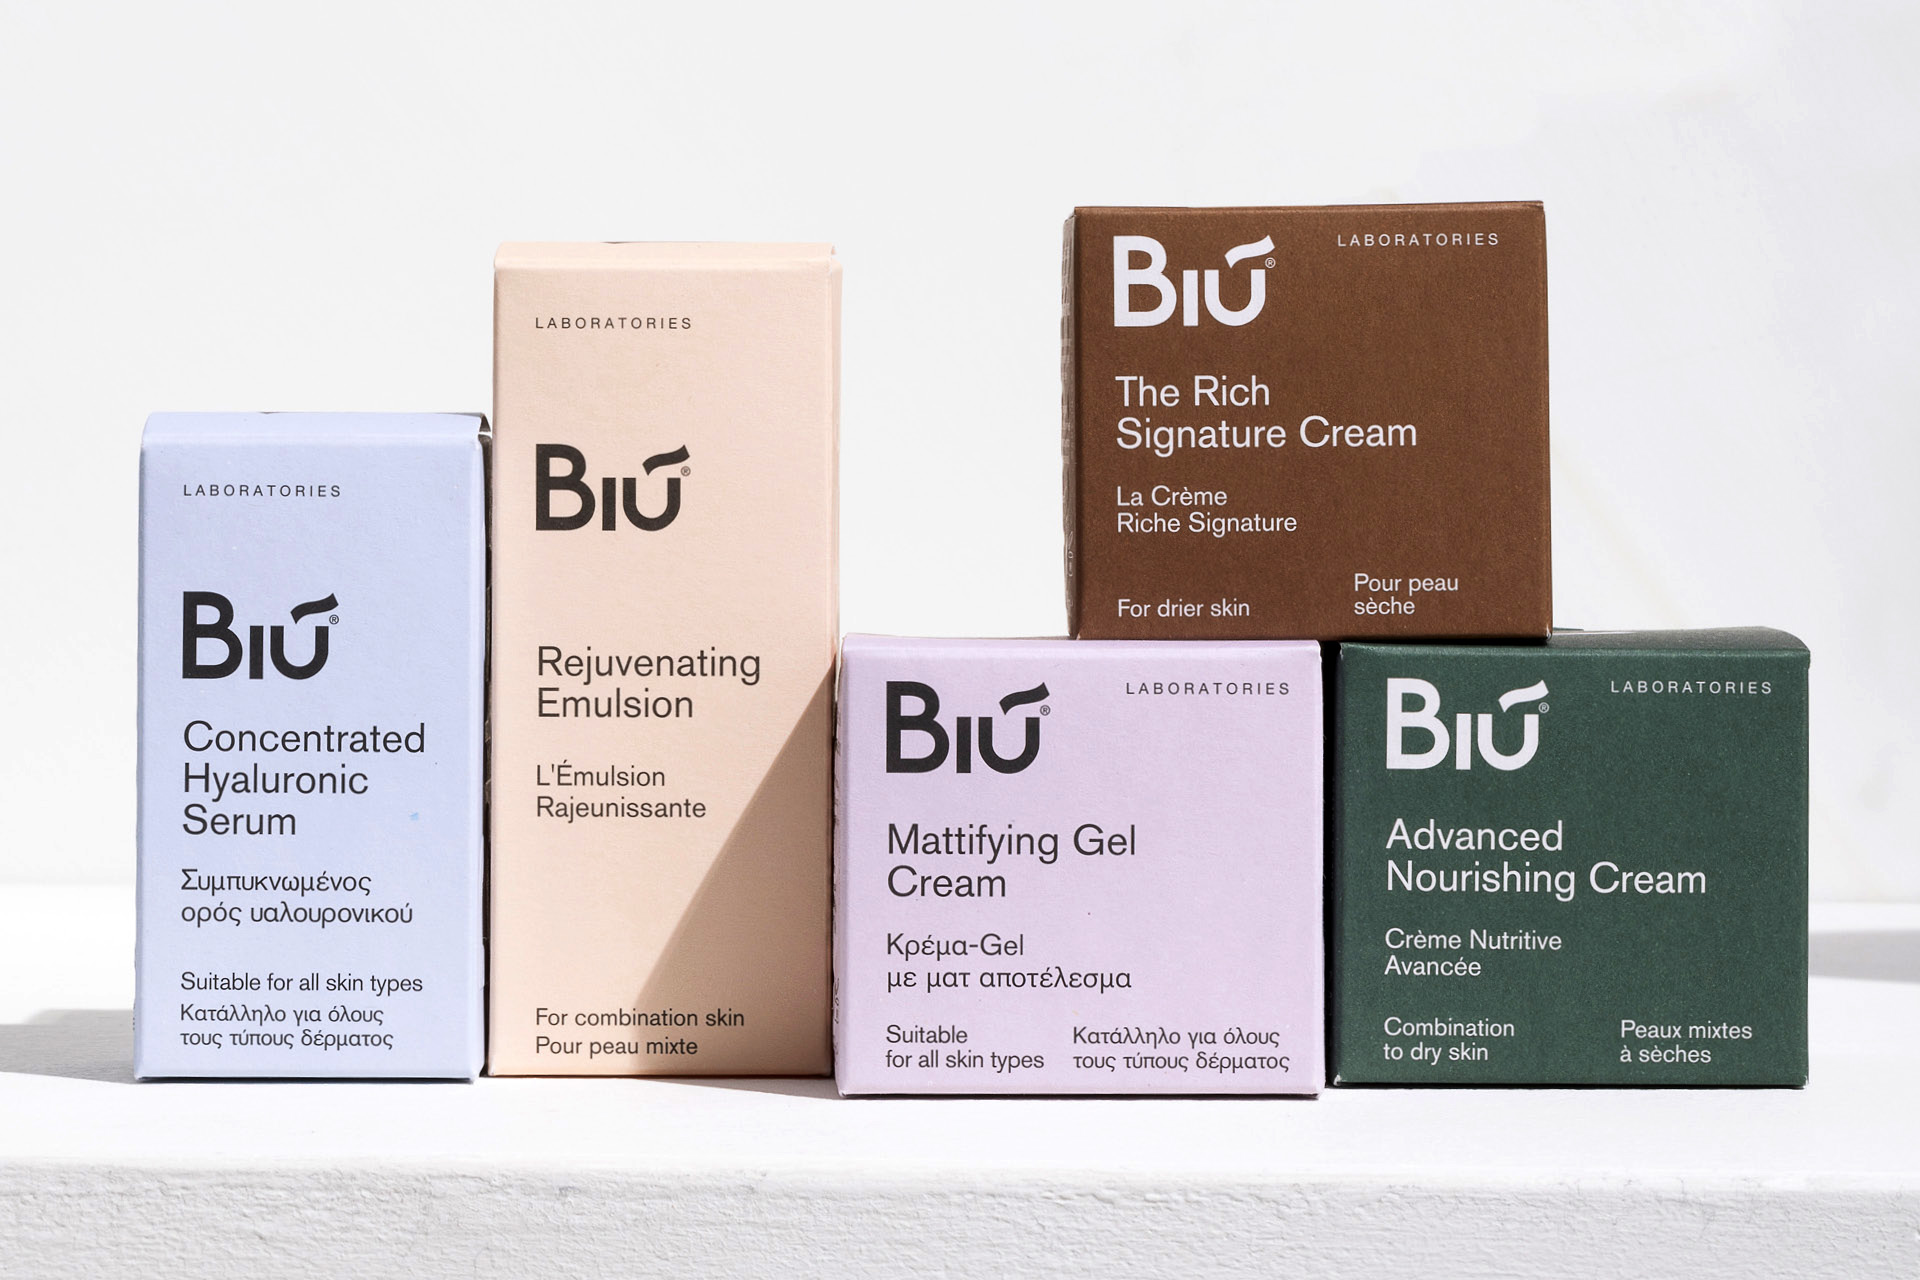 BIÚ Laboratories: Enhancing Natural Beauty Through Concise Packaging, Designed by Kemosabe Studio